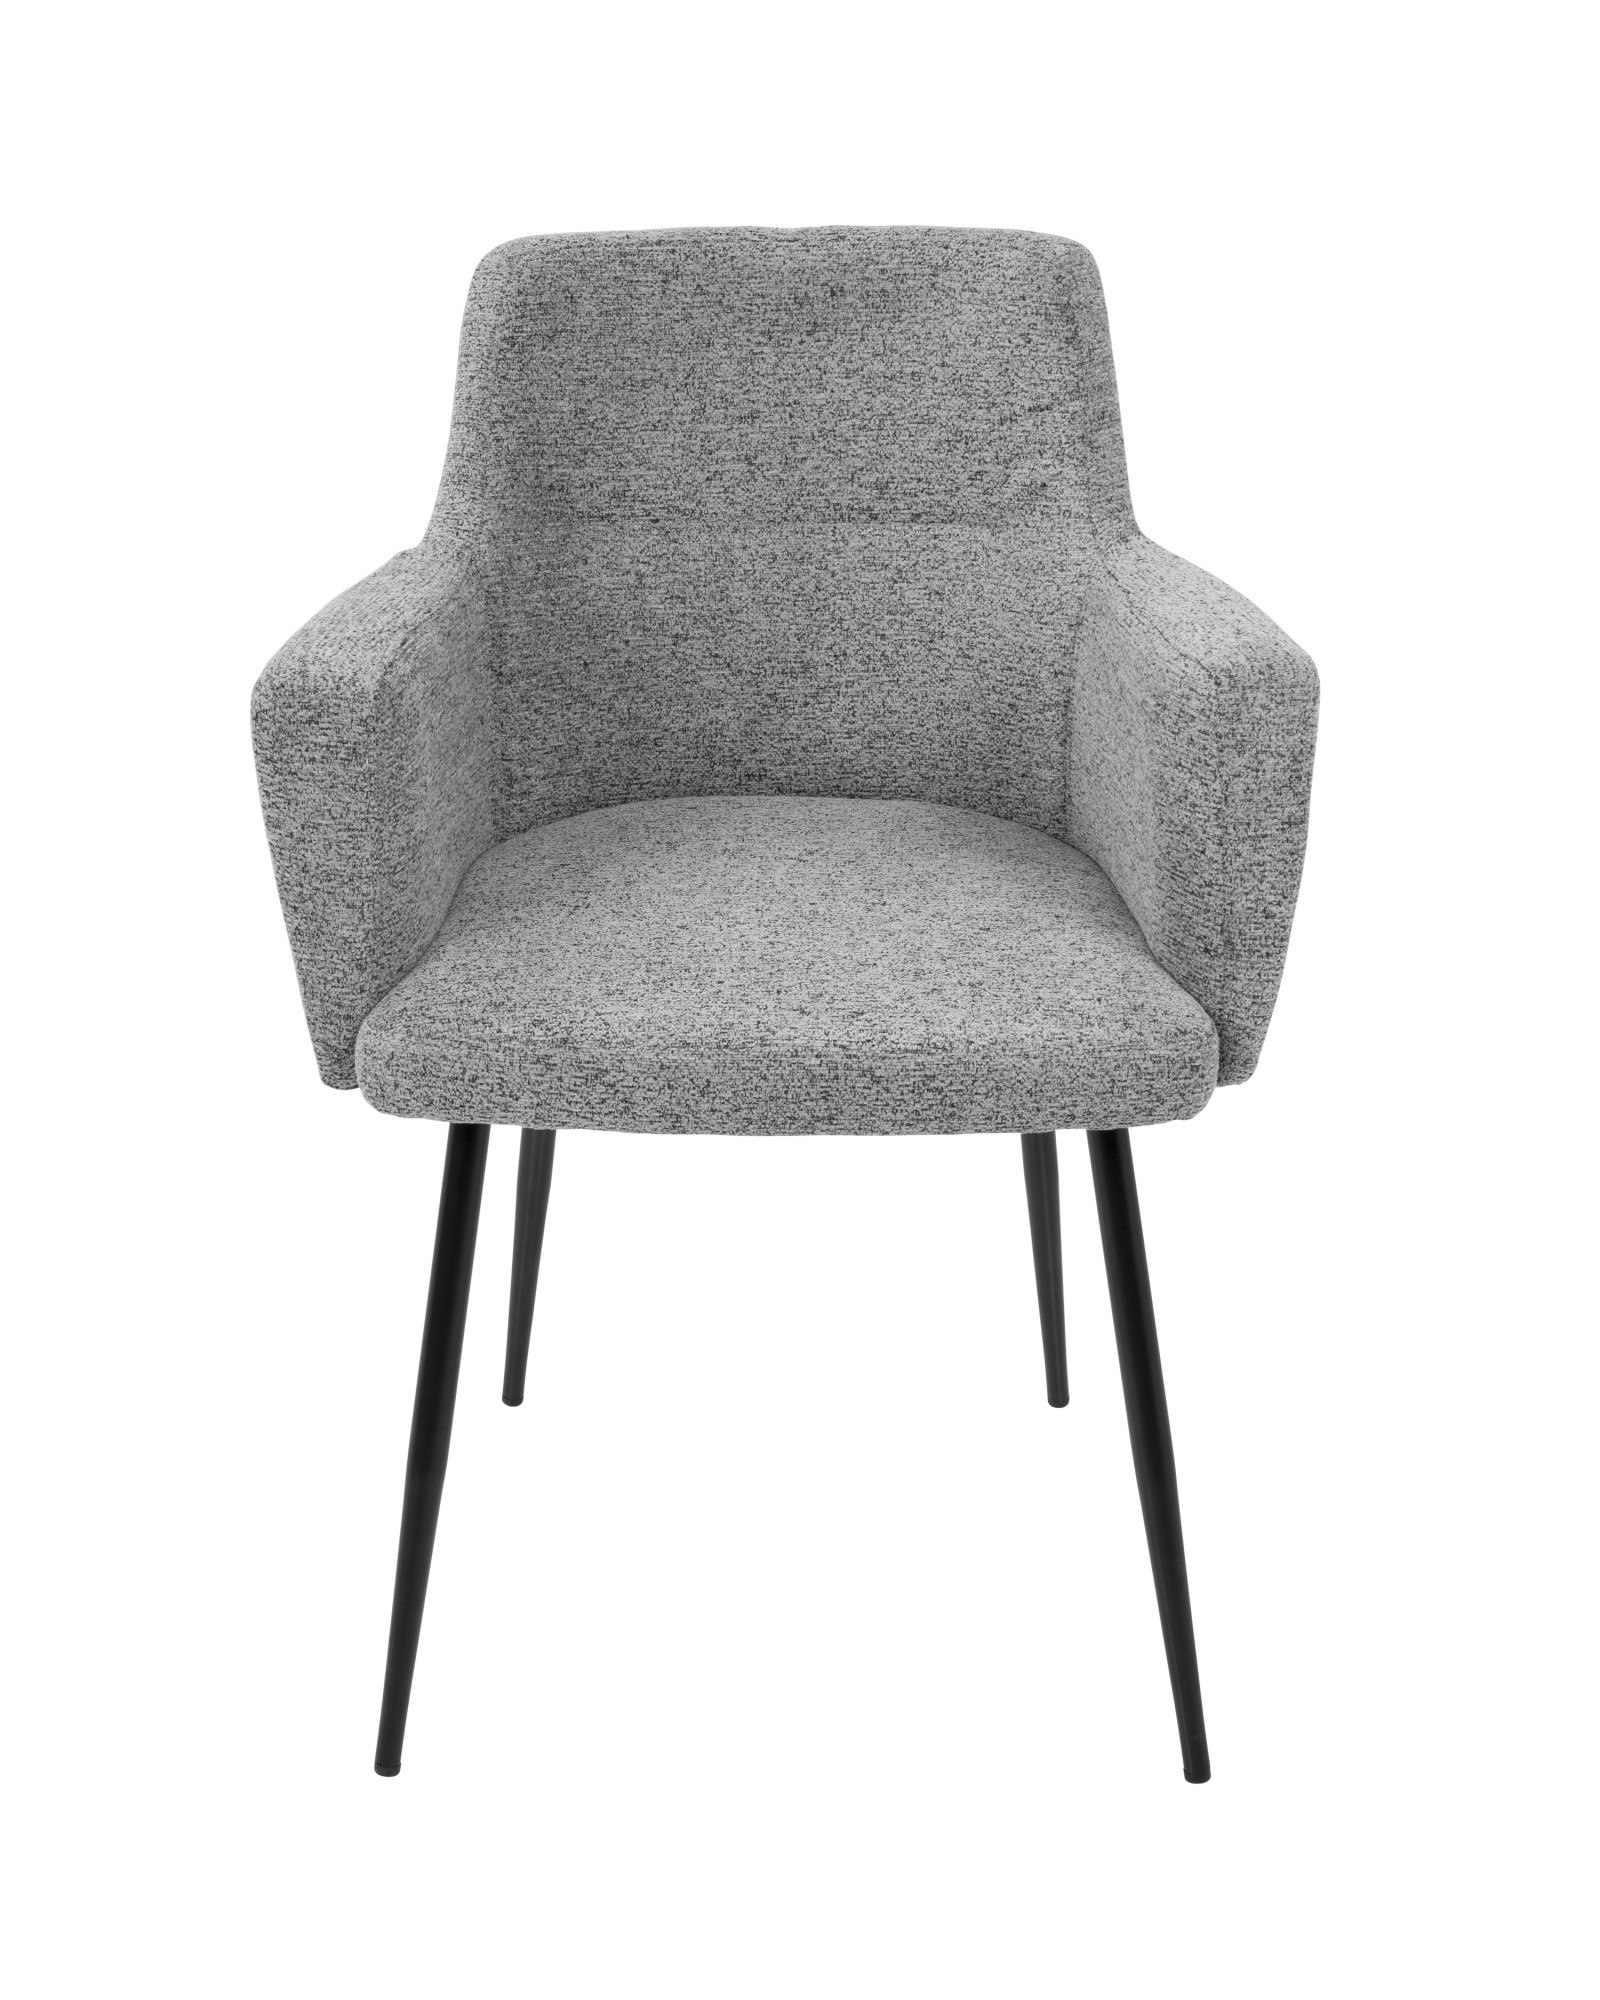 Andrew Contemporary Dining/Accent Chair in Black with Grey Fabric - Set of 2